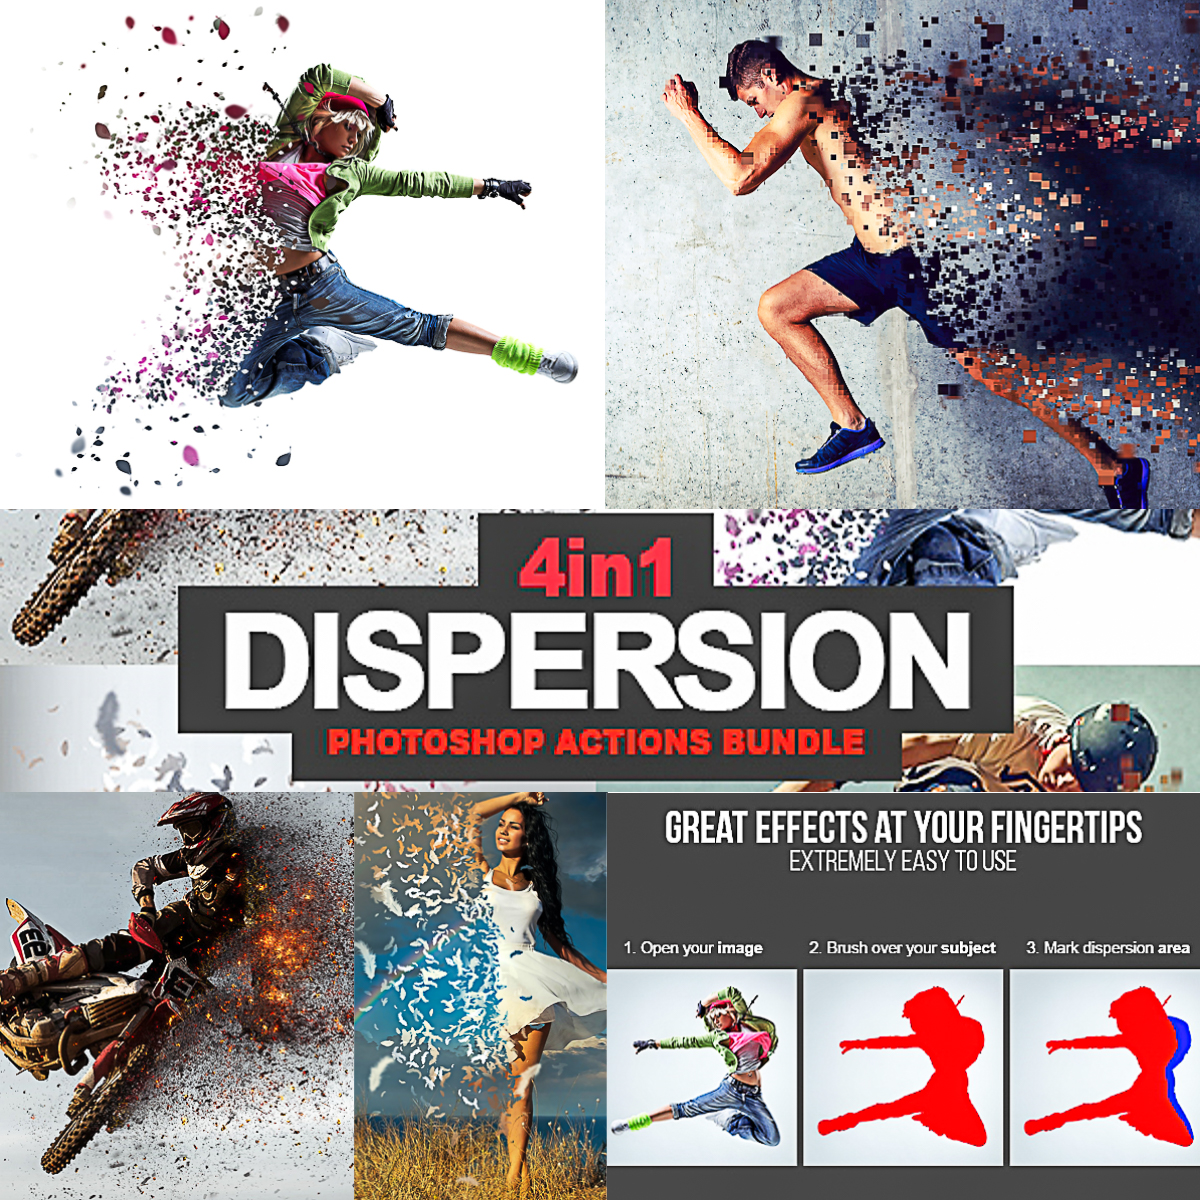 dispersion 1 photoshop action free download